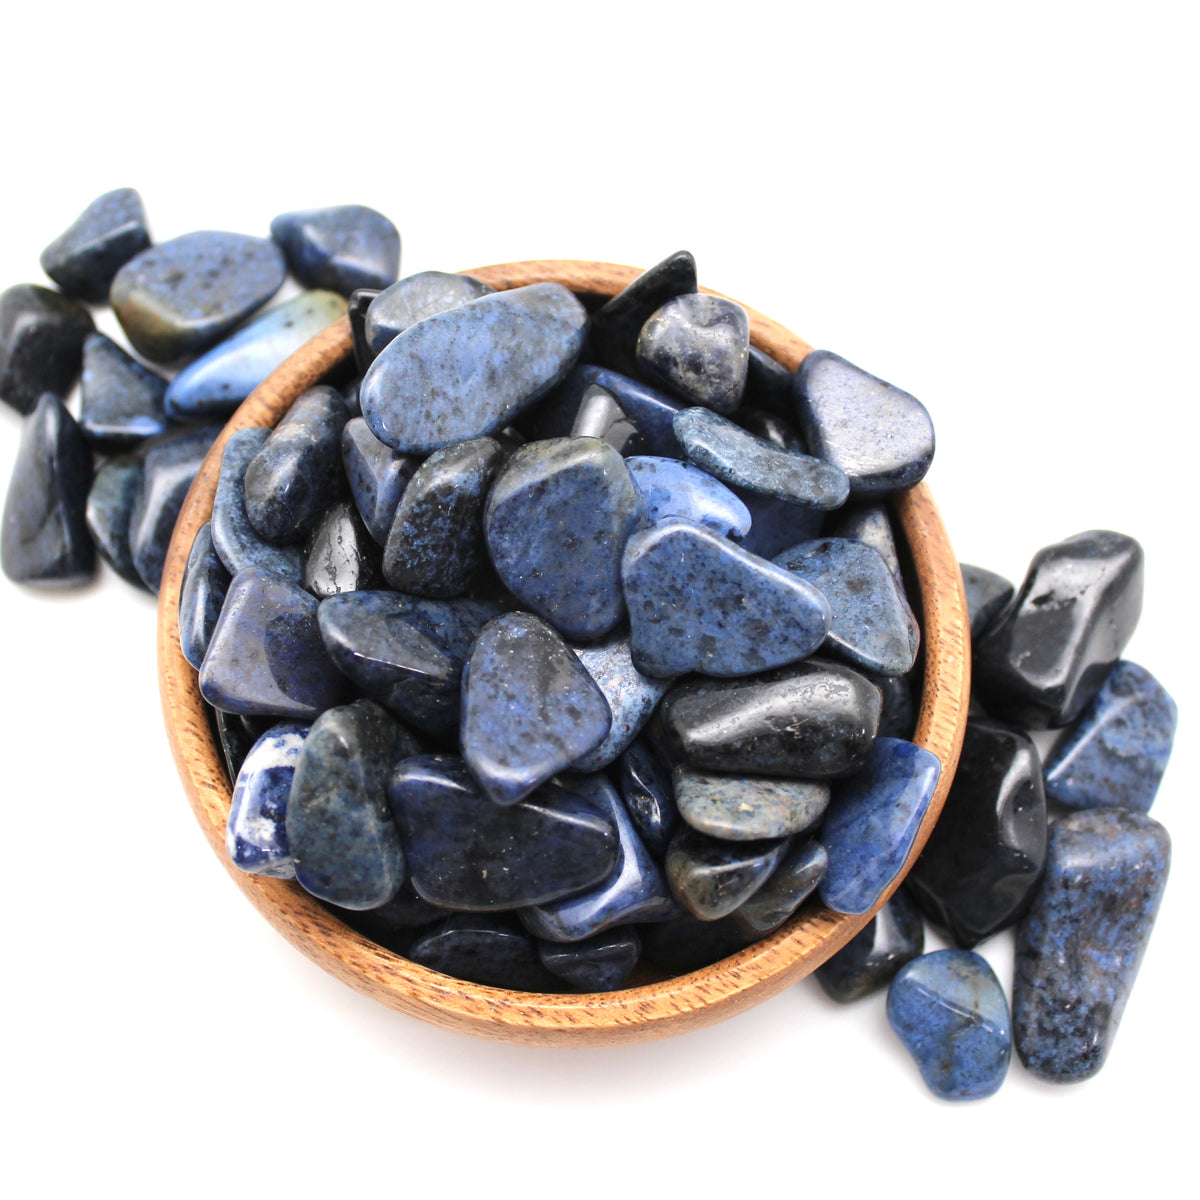 Multiple Dumortierite tumbled stones in a small bowl